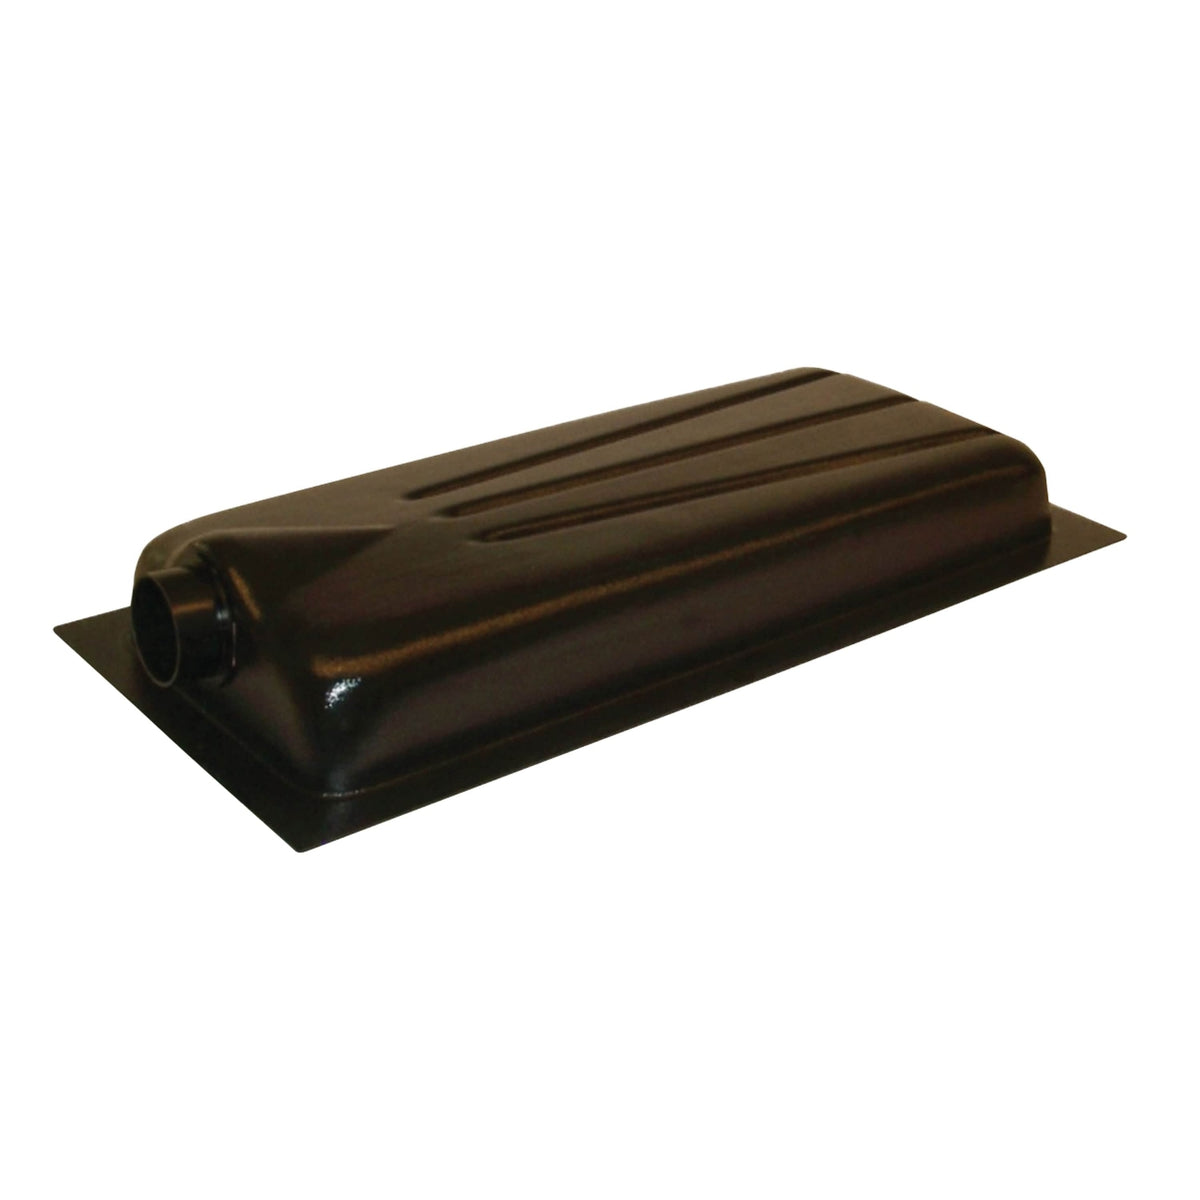 ICON Qualifies for Free Shipping ICON Holding Tank Center End Drain HT707ED 34.5" x 16.5" x 6" #01601